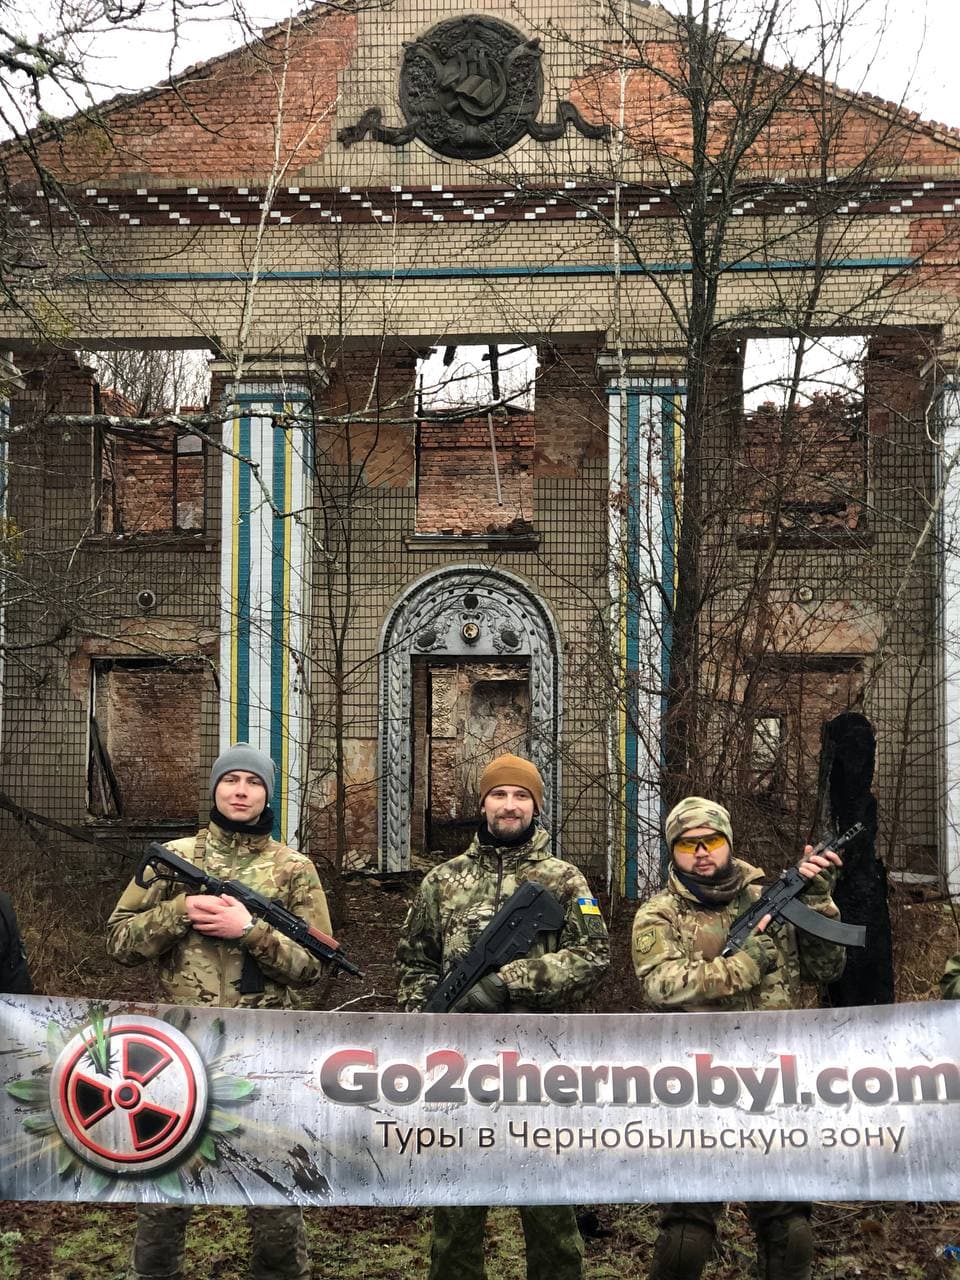 Airsoft events in the Chernobyl exclusion zone - photo 1